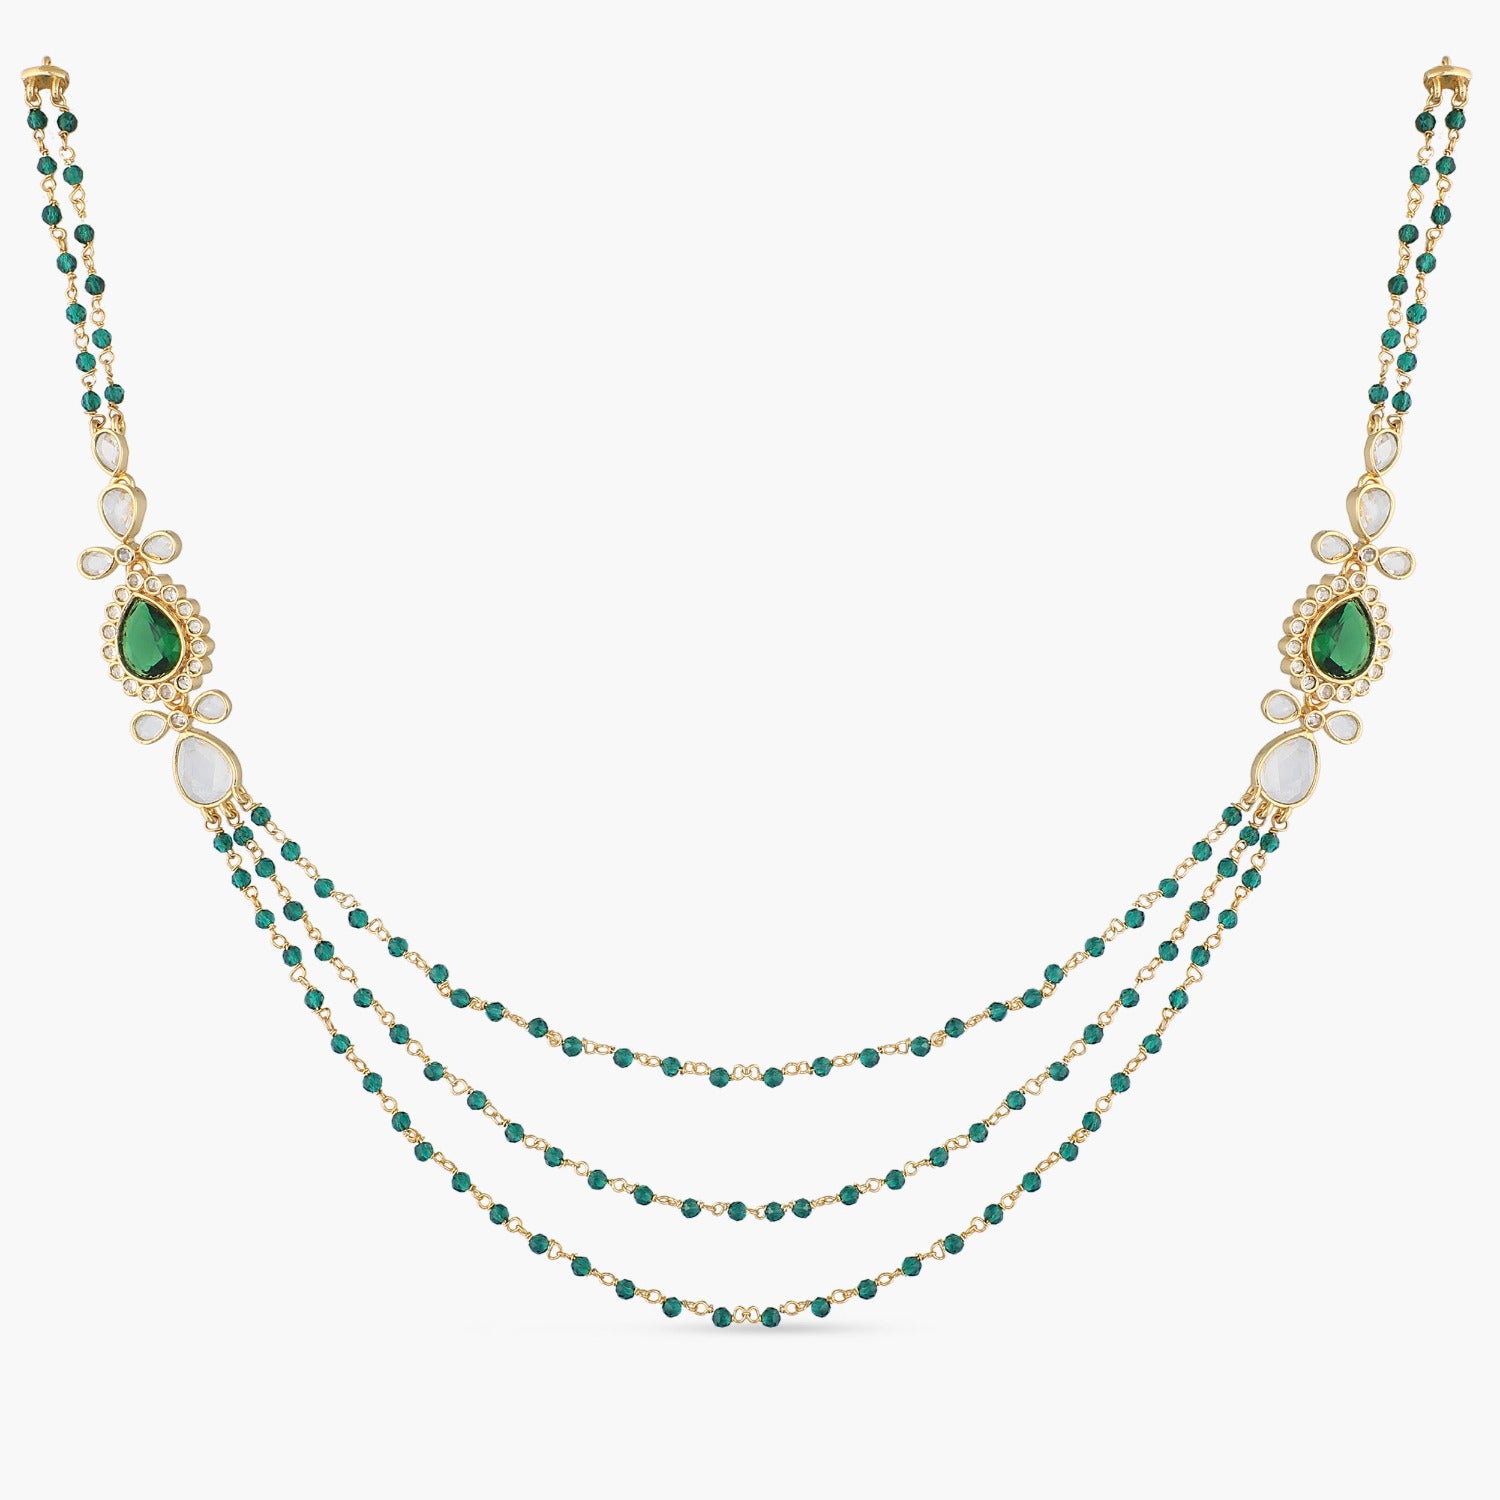 Classic Beads Layered Necklace